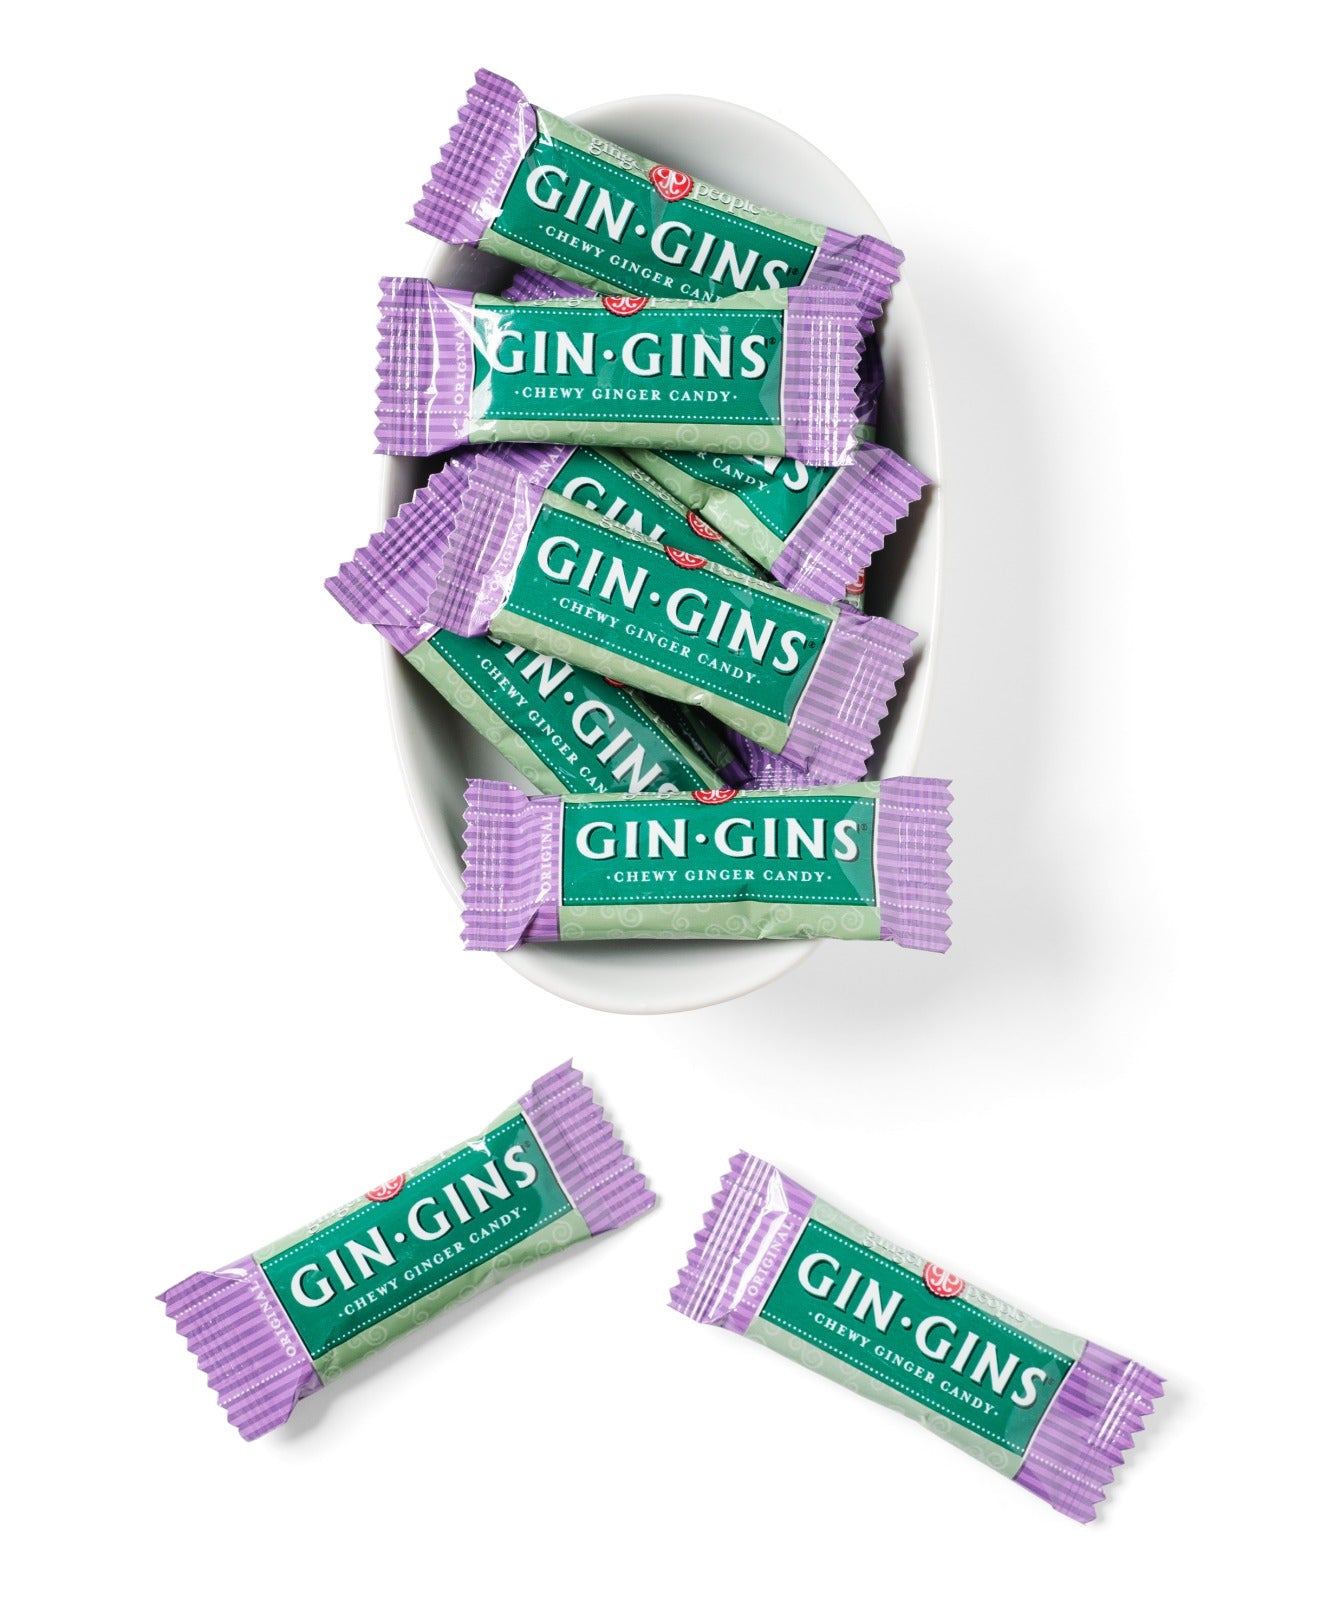 Gin Gins  Original Chewy Ginger Candy